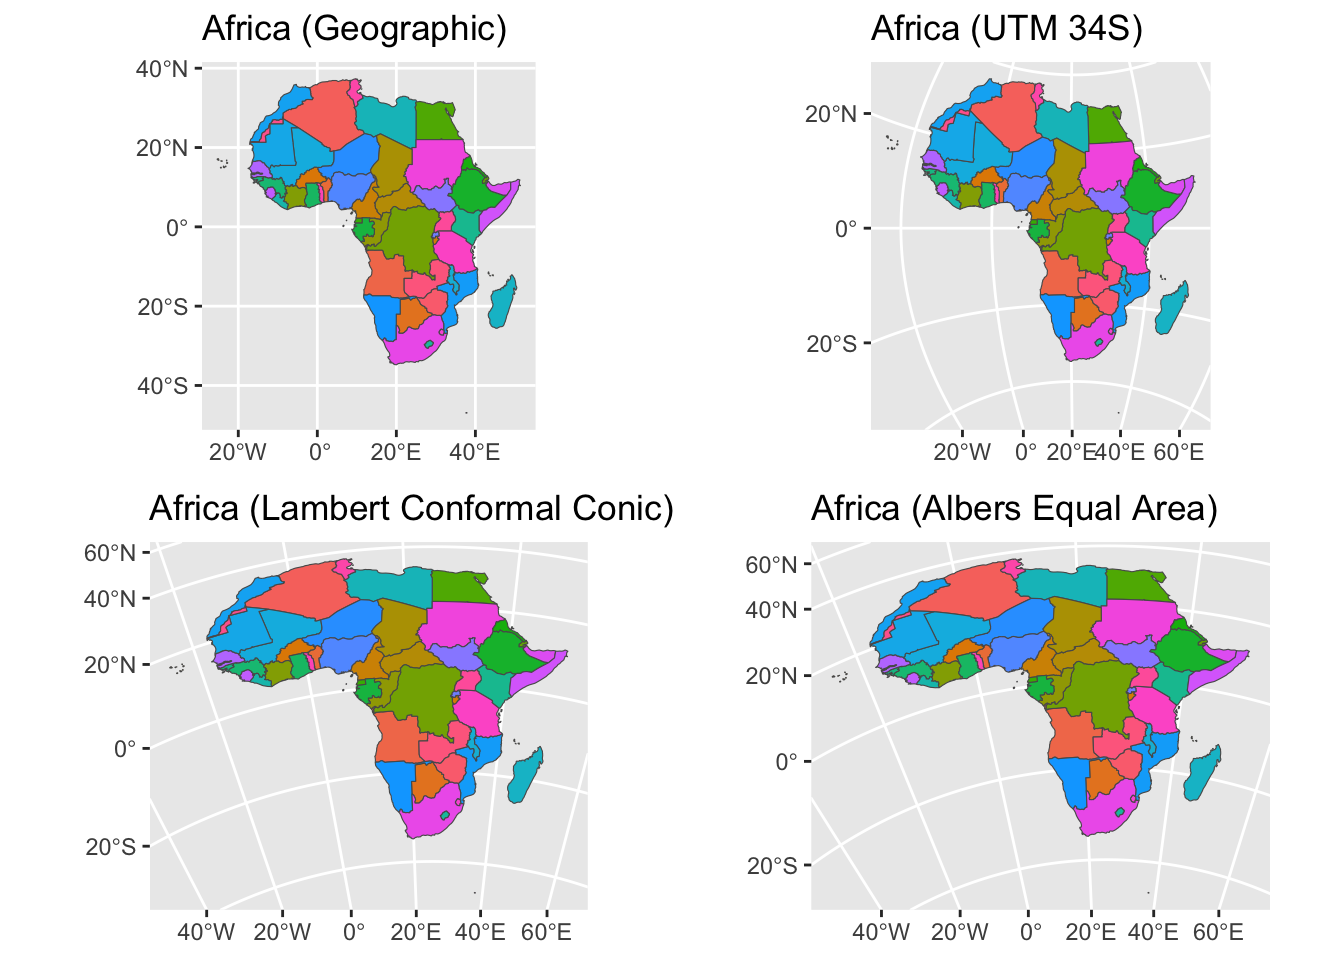 Africa, visualized with different coordinate reference systems. All four maps are different, even if the differences may be subtle!